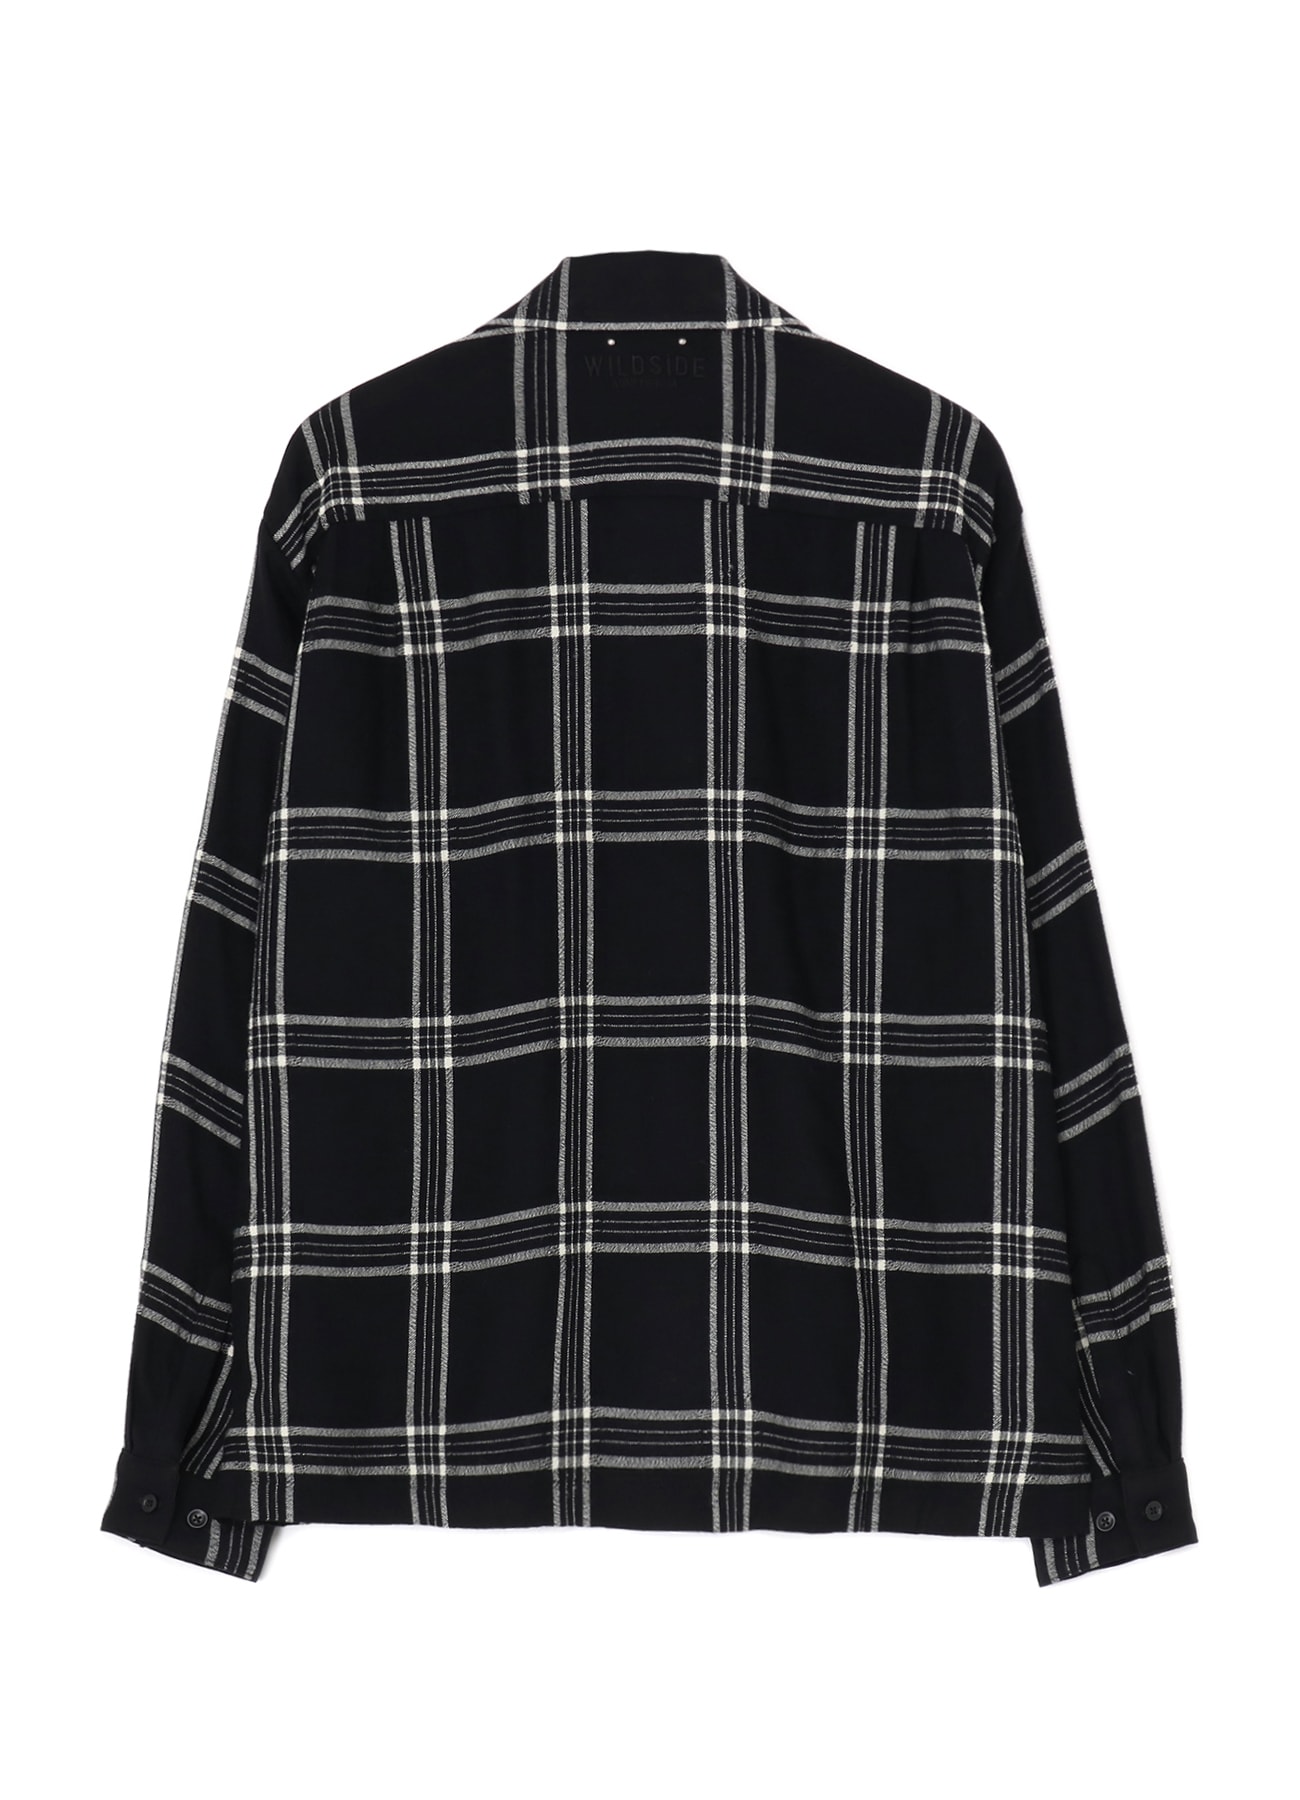 WILDSIDE×MINEDENIM R.Wool Flannel Check Embroidery Open Collar SH ...